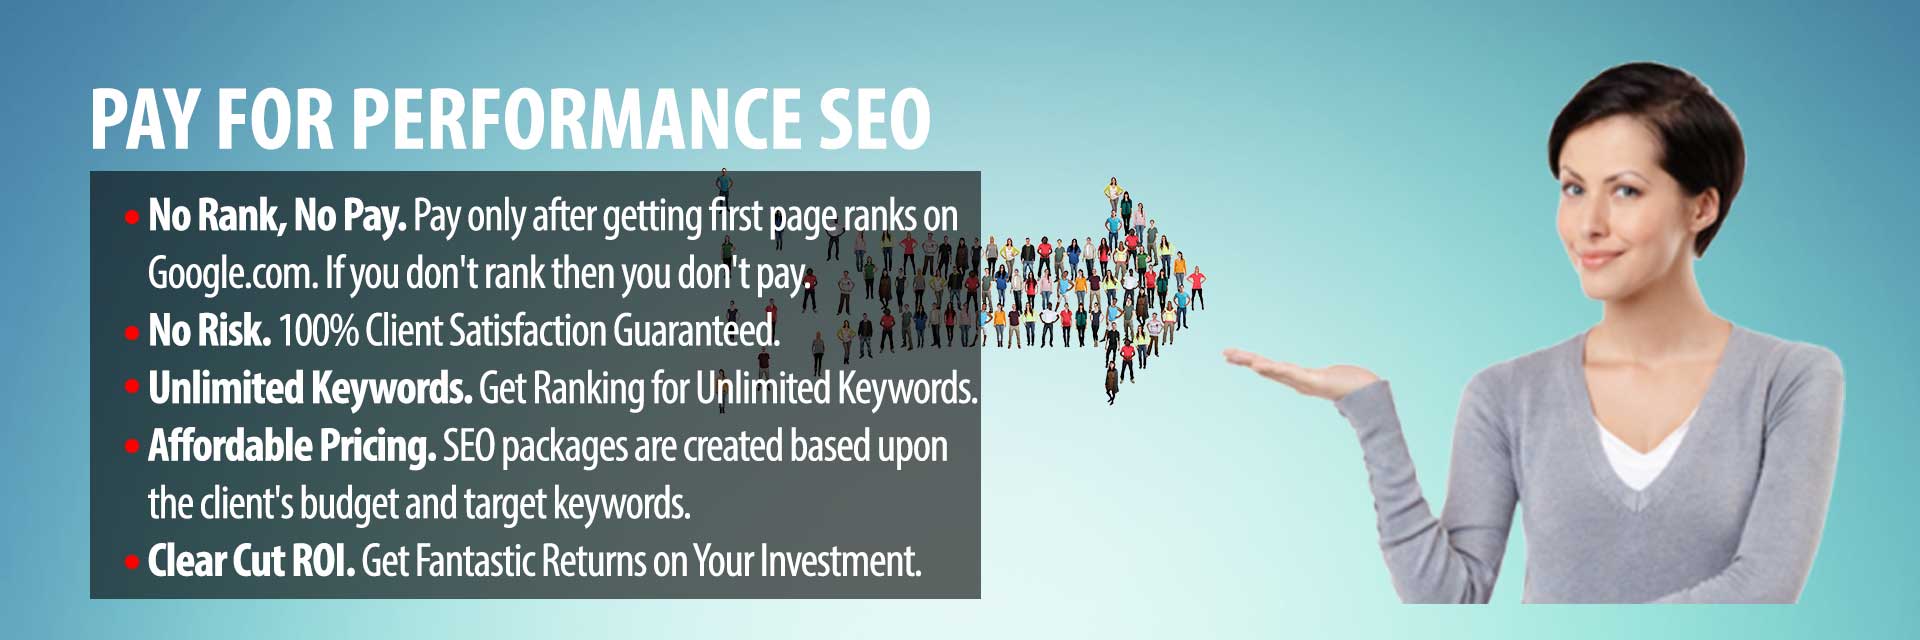 Pay For Performance SEO